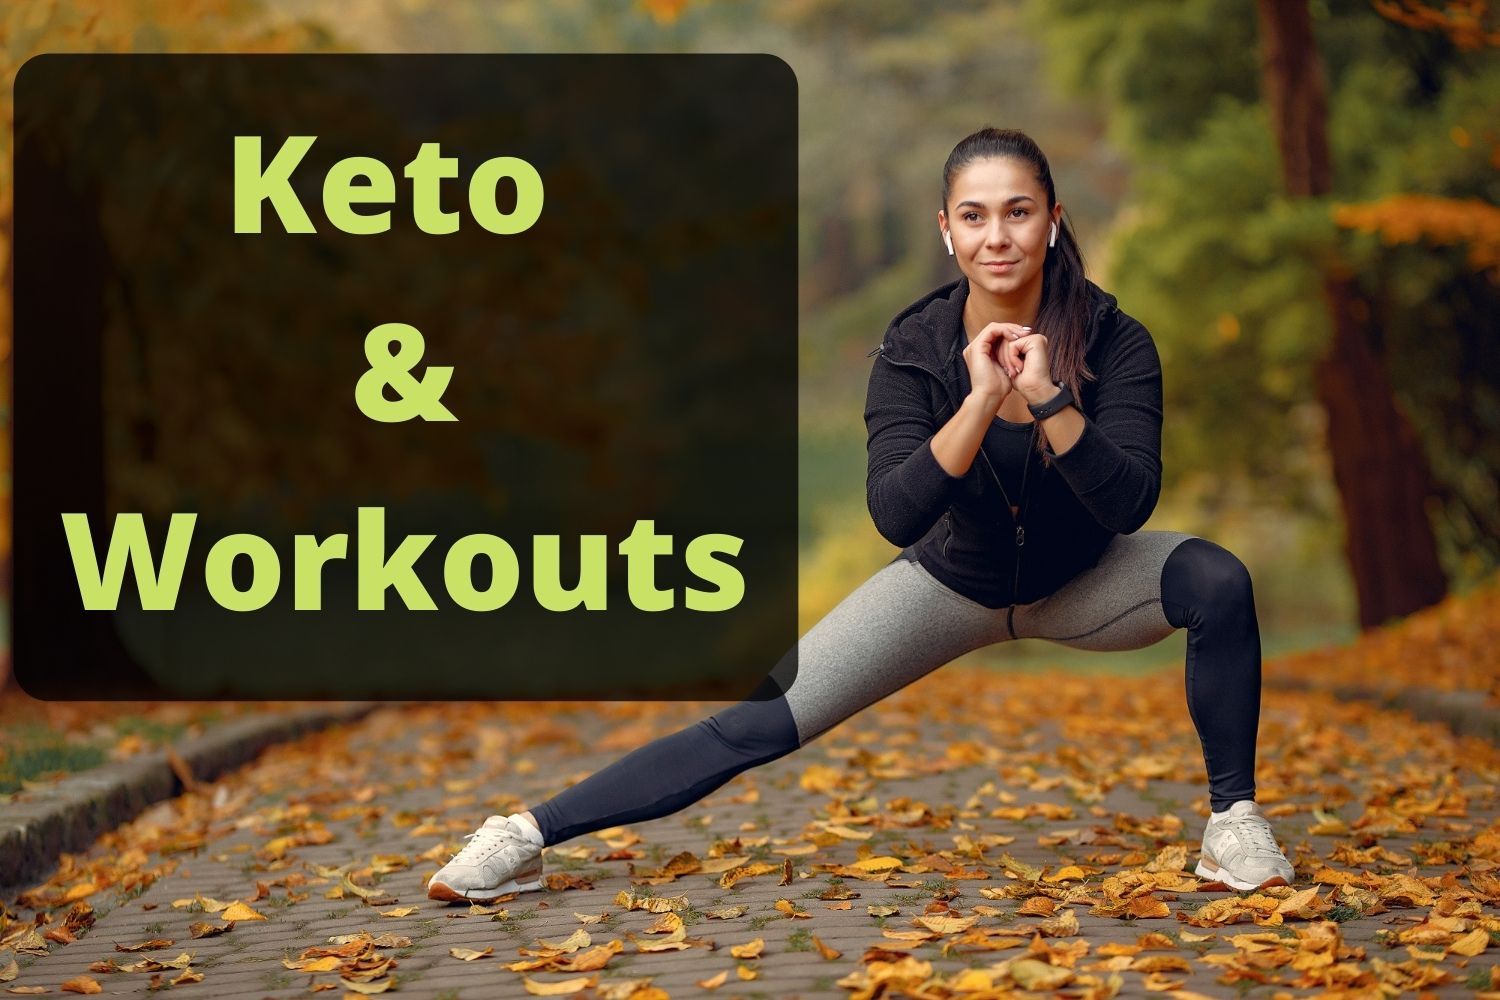 Keto and Workout